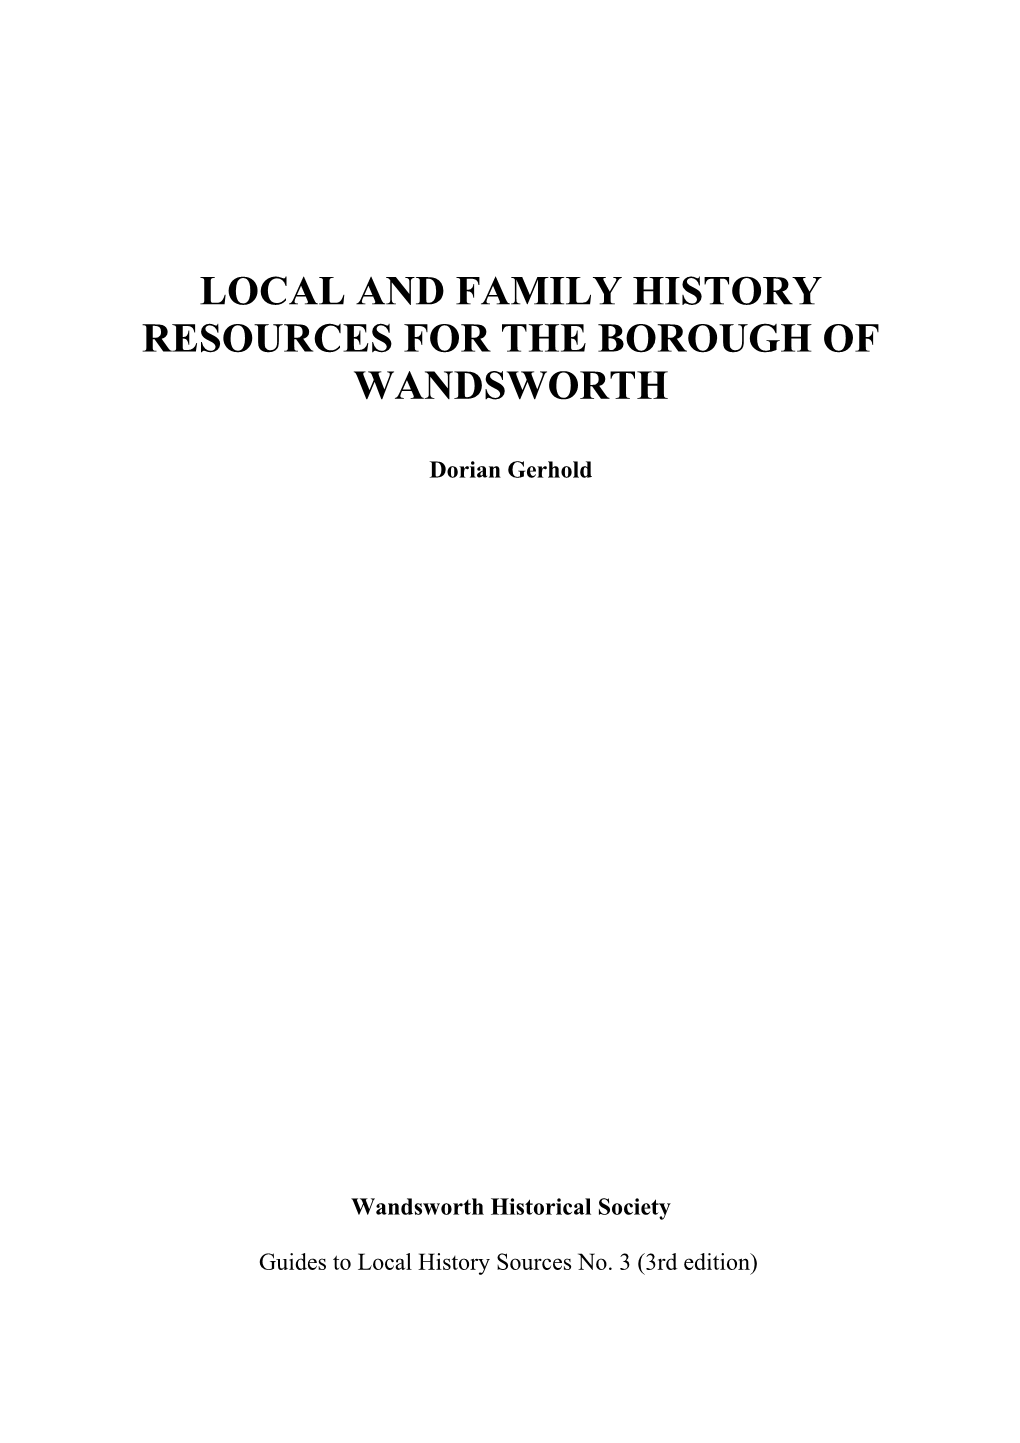 Local and Family History Resources for the Borough of Wandsworth